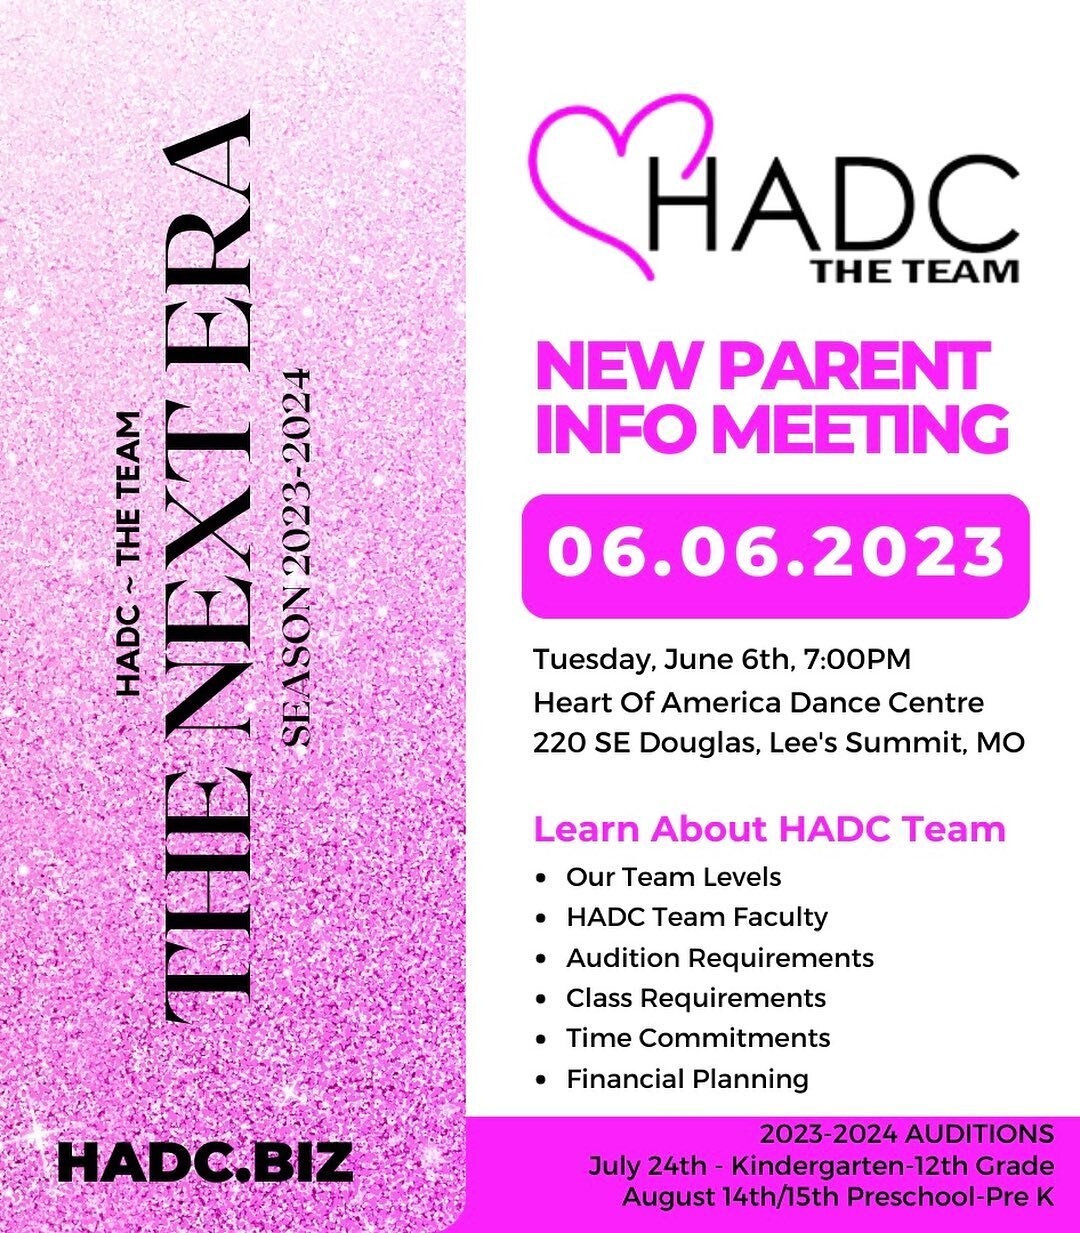 🖤Are you interested in auditioning for HADC ~ The Team next season? 

✨Join us for an informational parent meeting to learn more about our competitive programs at HADC. Tuesday, June 6th at 7pm. No commitment required! Visit hadc biz to see more inf